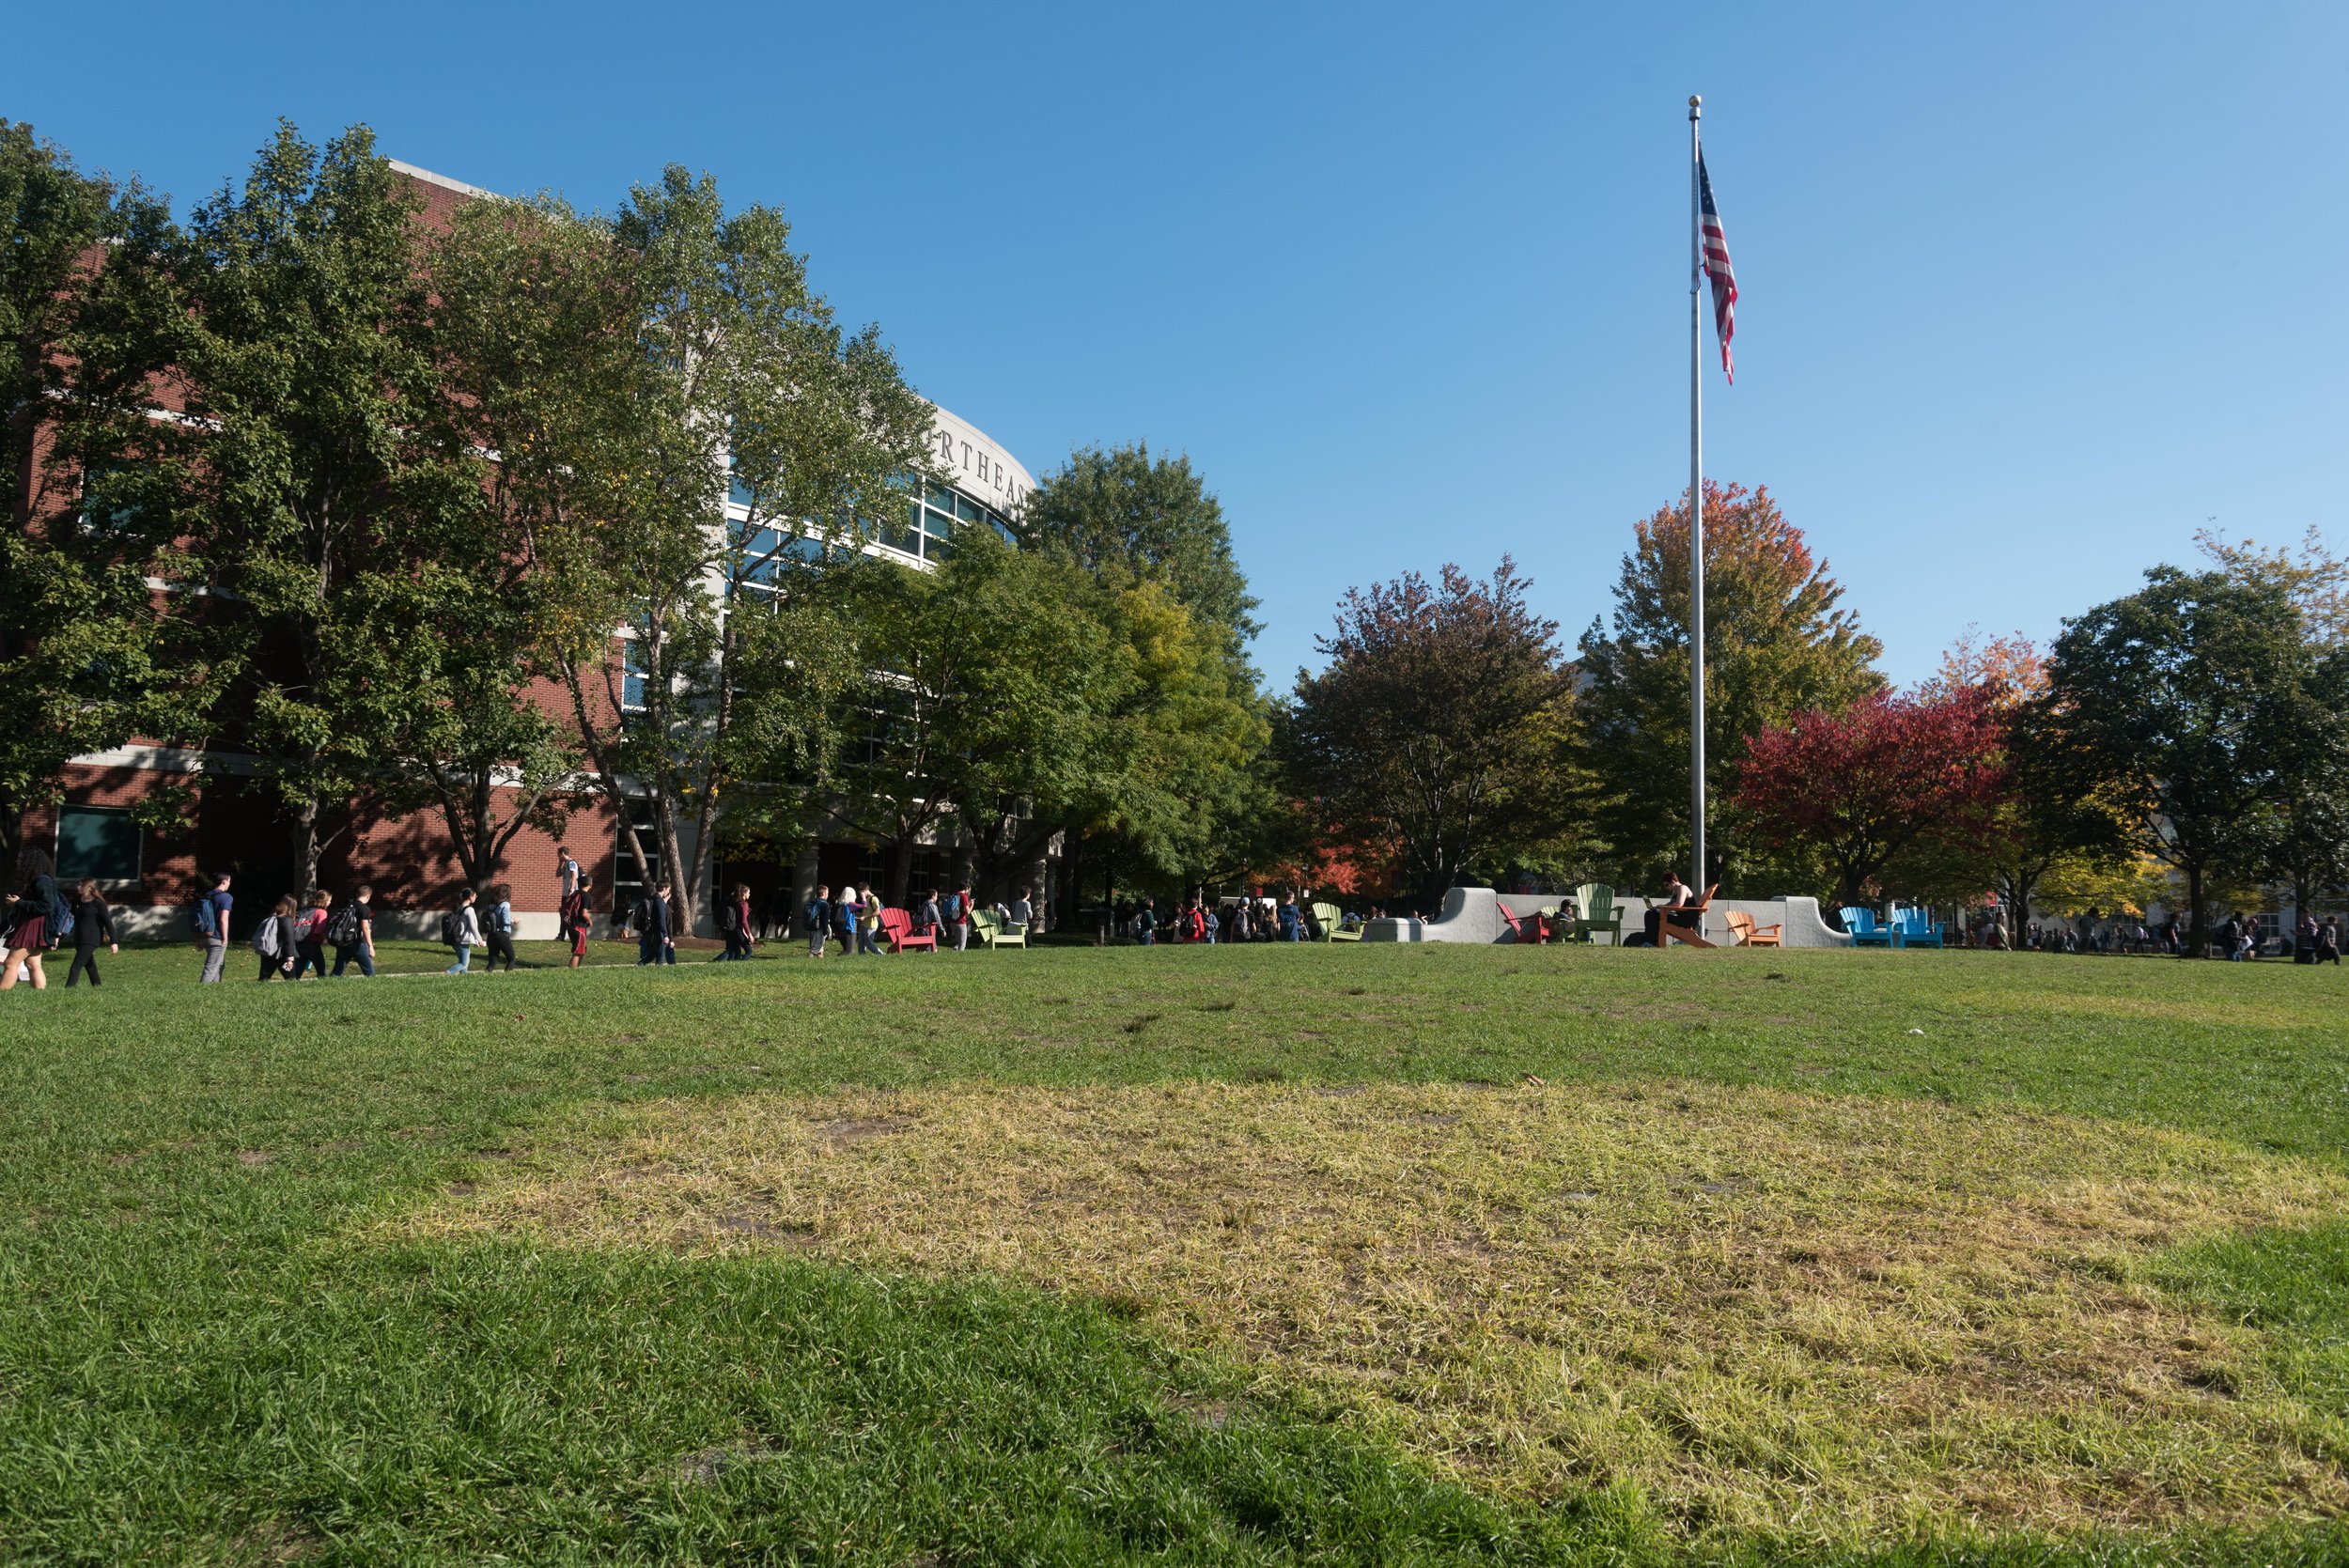  Students walk past Centennial Commons on Monday,&nbsp;Oct. 17, 2016. DivestNU ended their encampment of Centennial two days earlier.  "We didn't gain any specific steps from the administration towards divestment. We were, however, very successful in